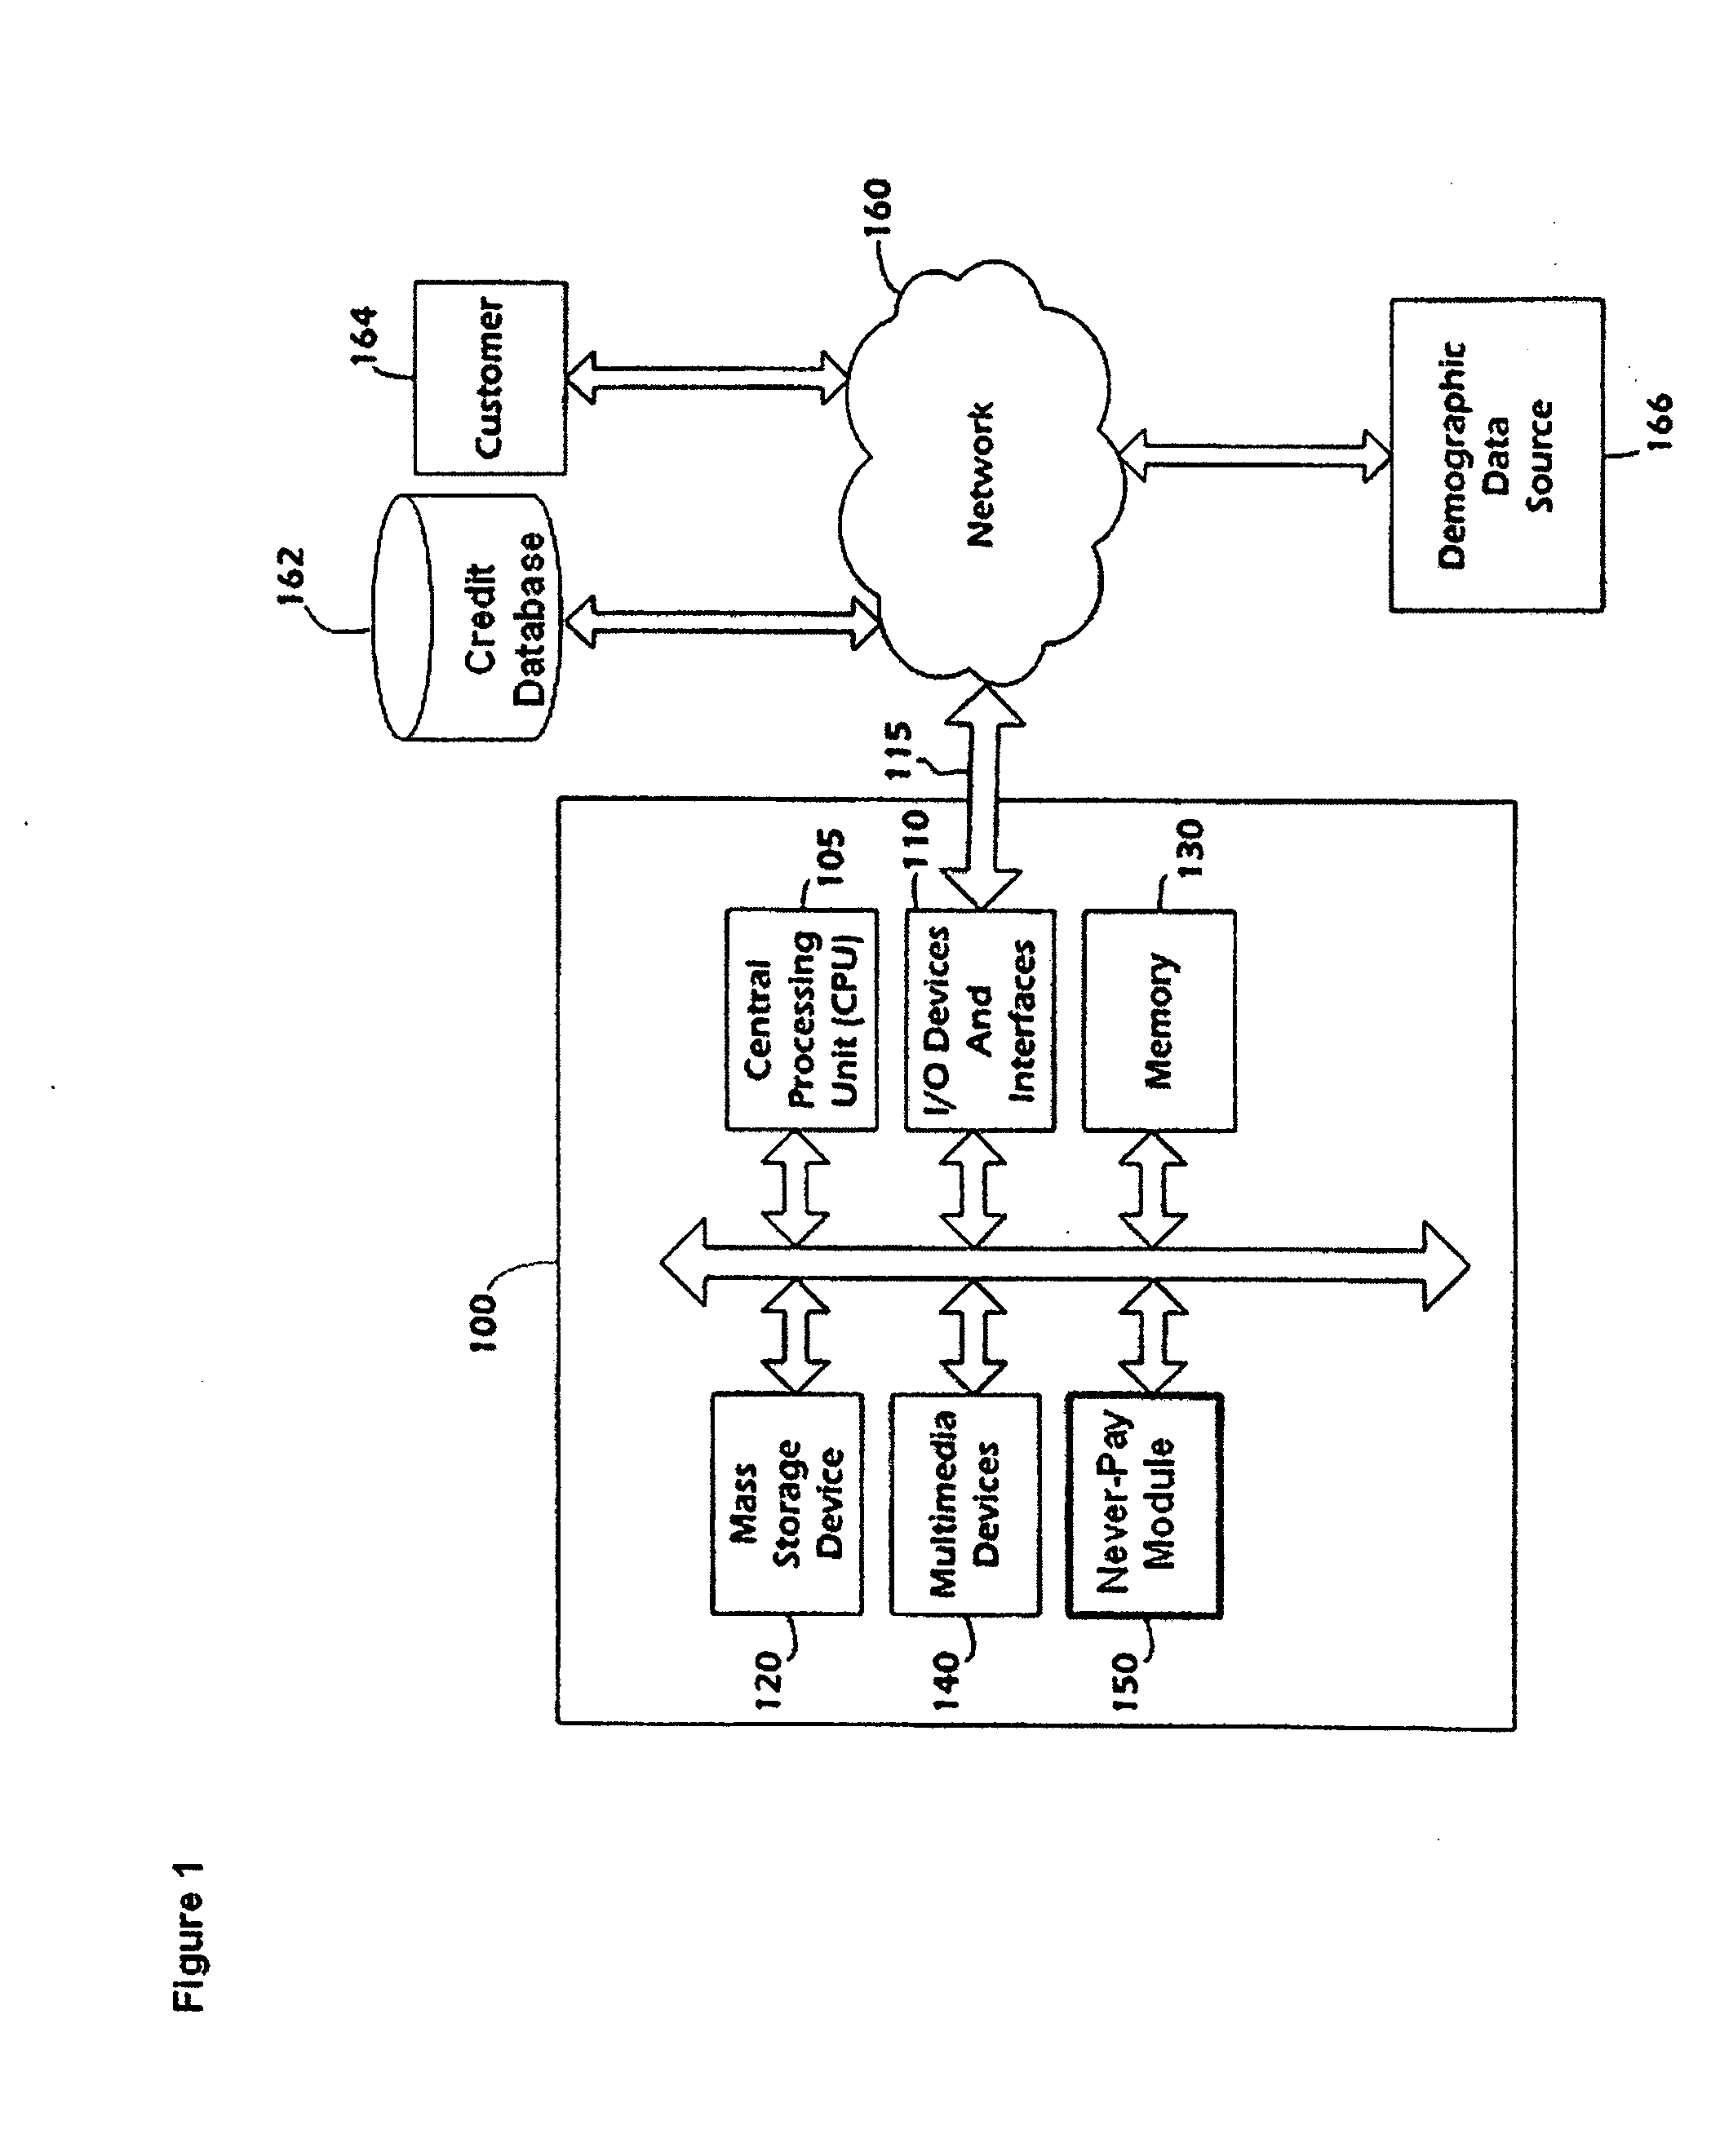 System and method for automated detection of never-pay data sets